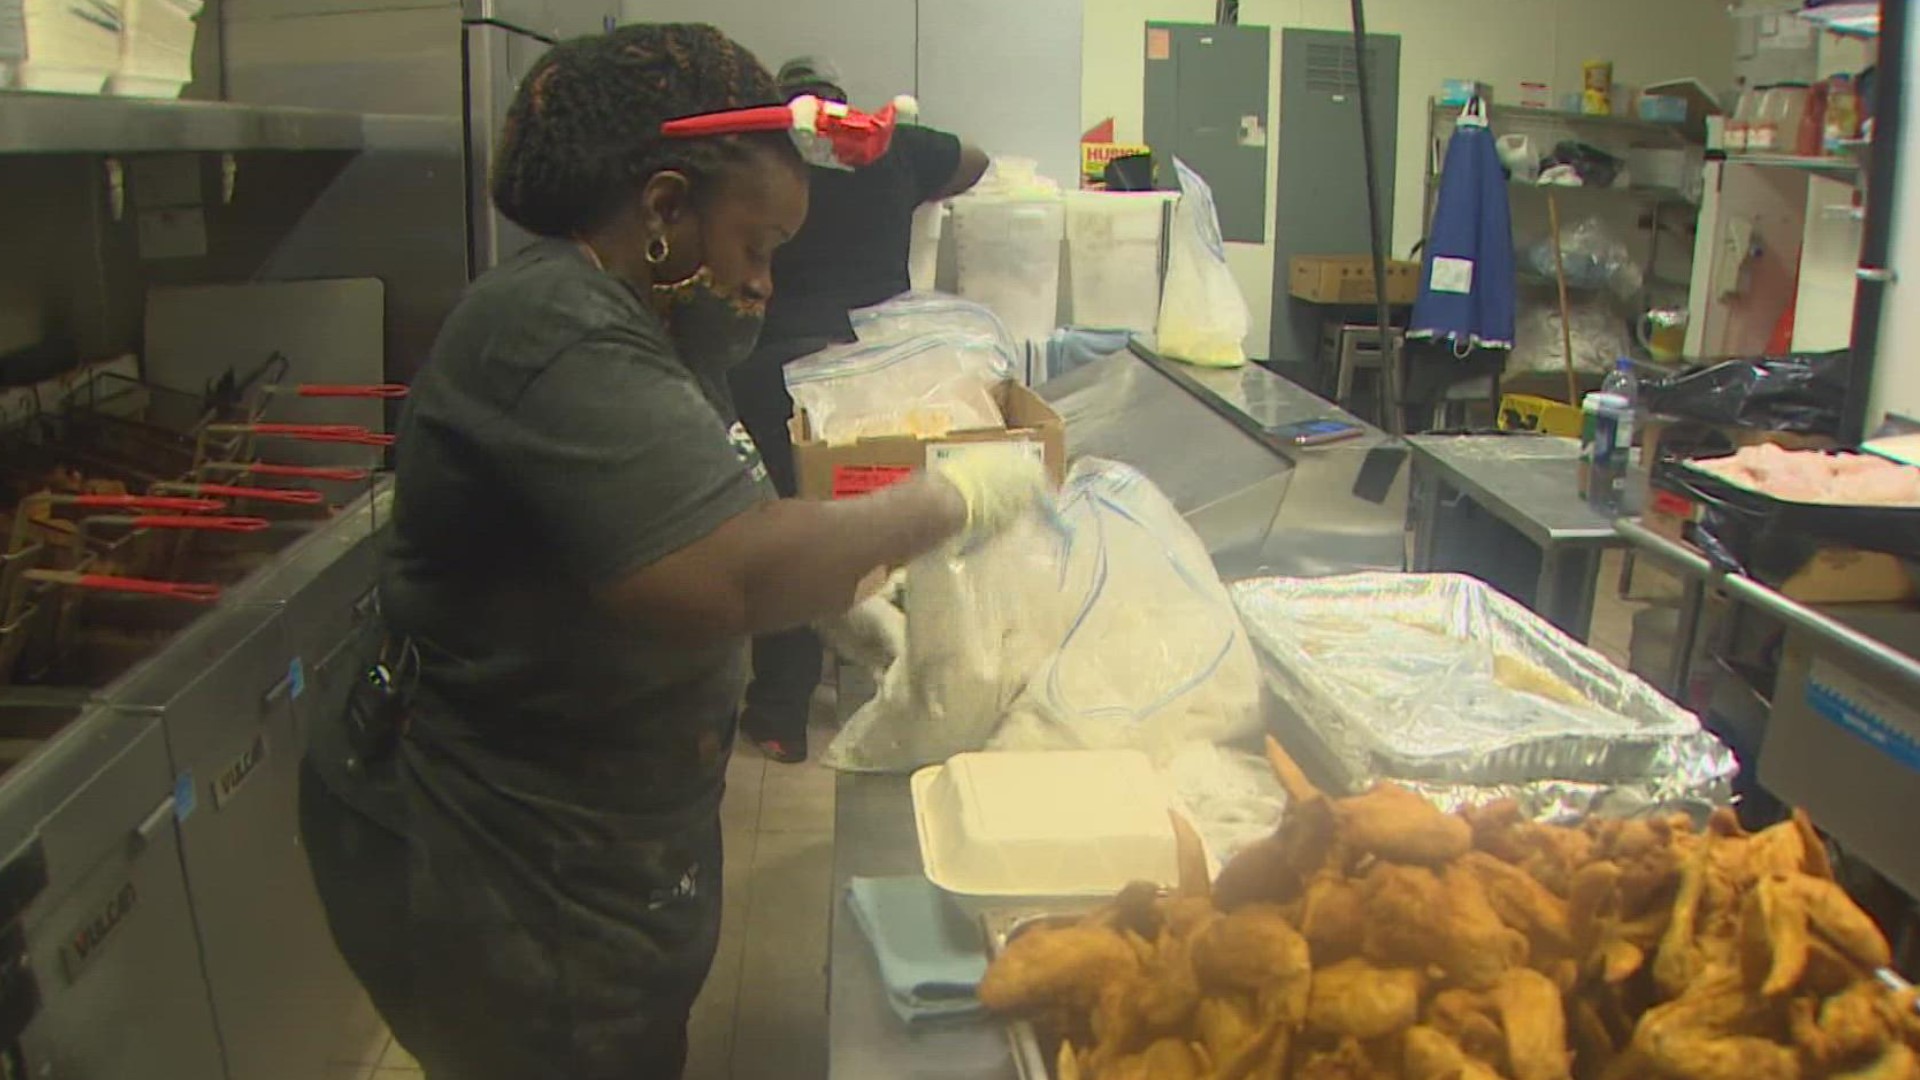 Nana's Southern Kitchen gave out 400 free meals last year but decided to triple that number this Christmas after a difficult 2021.